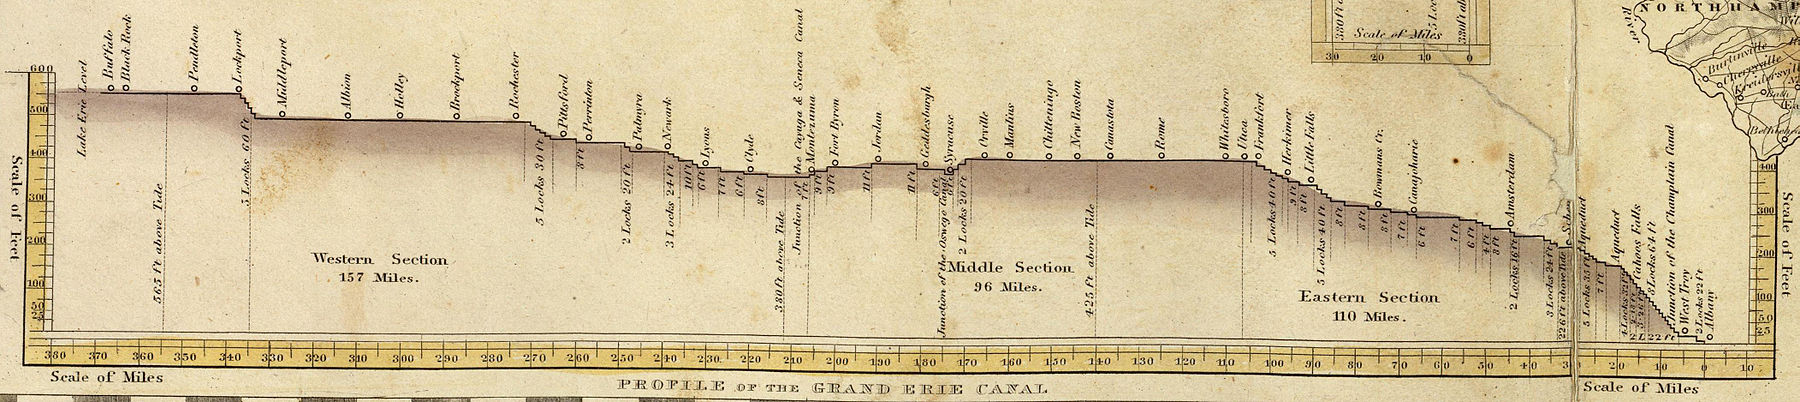 Profile of the original canal